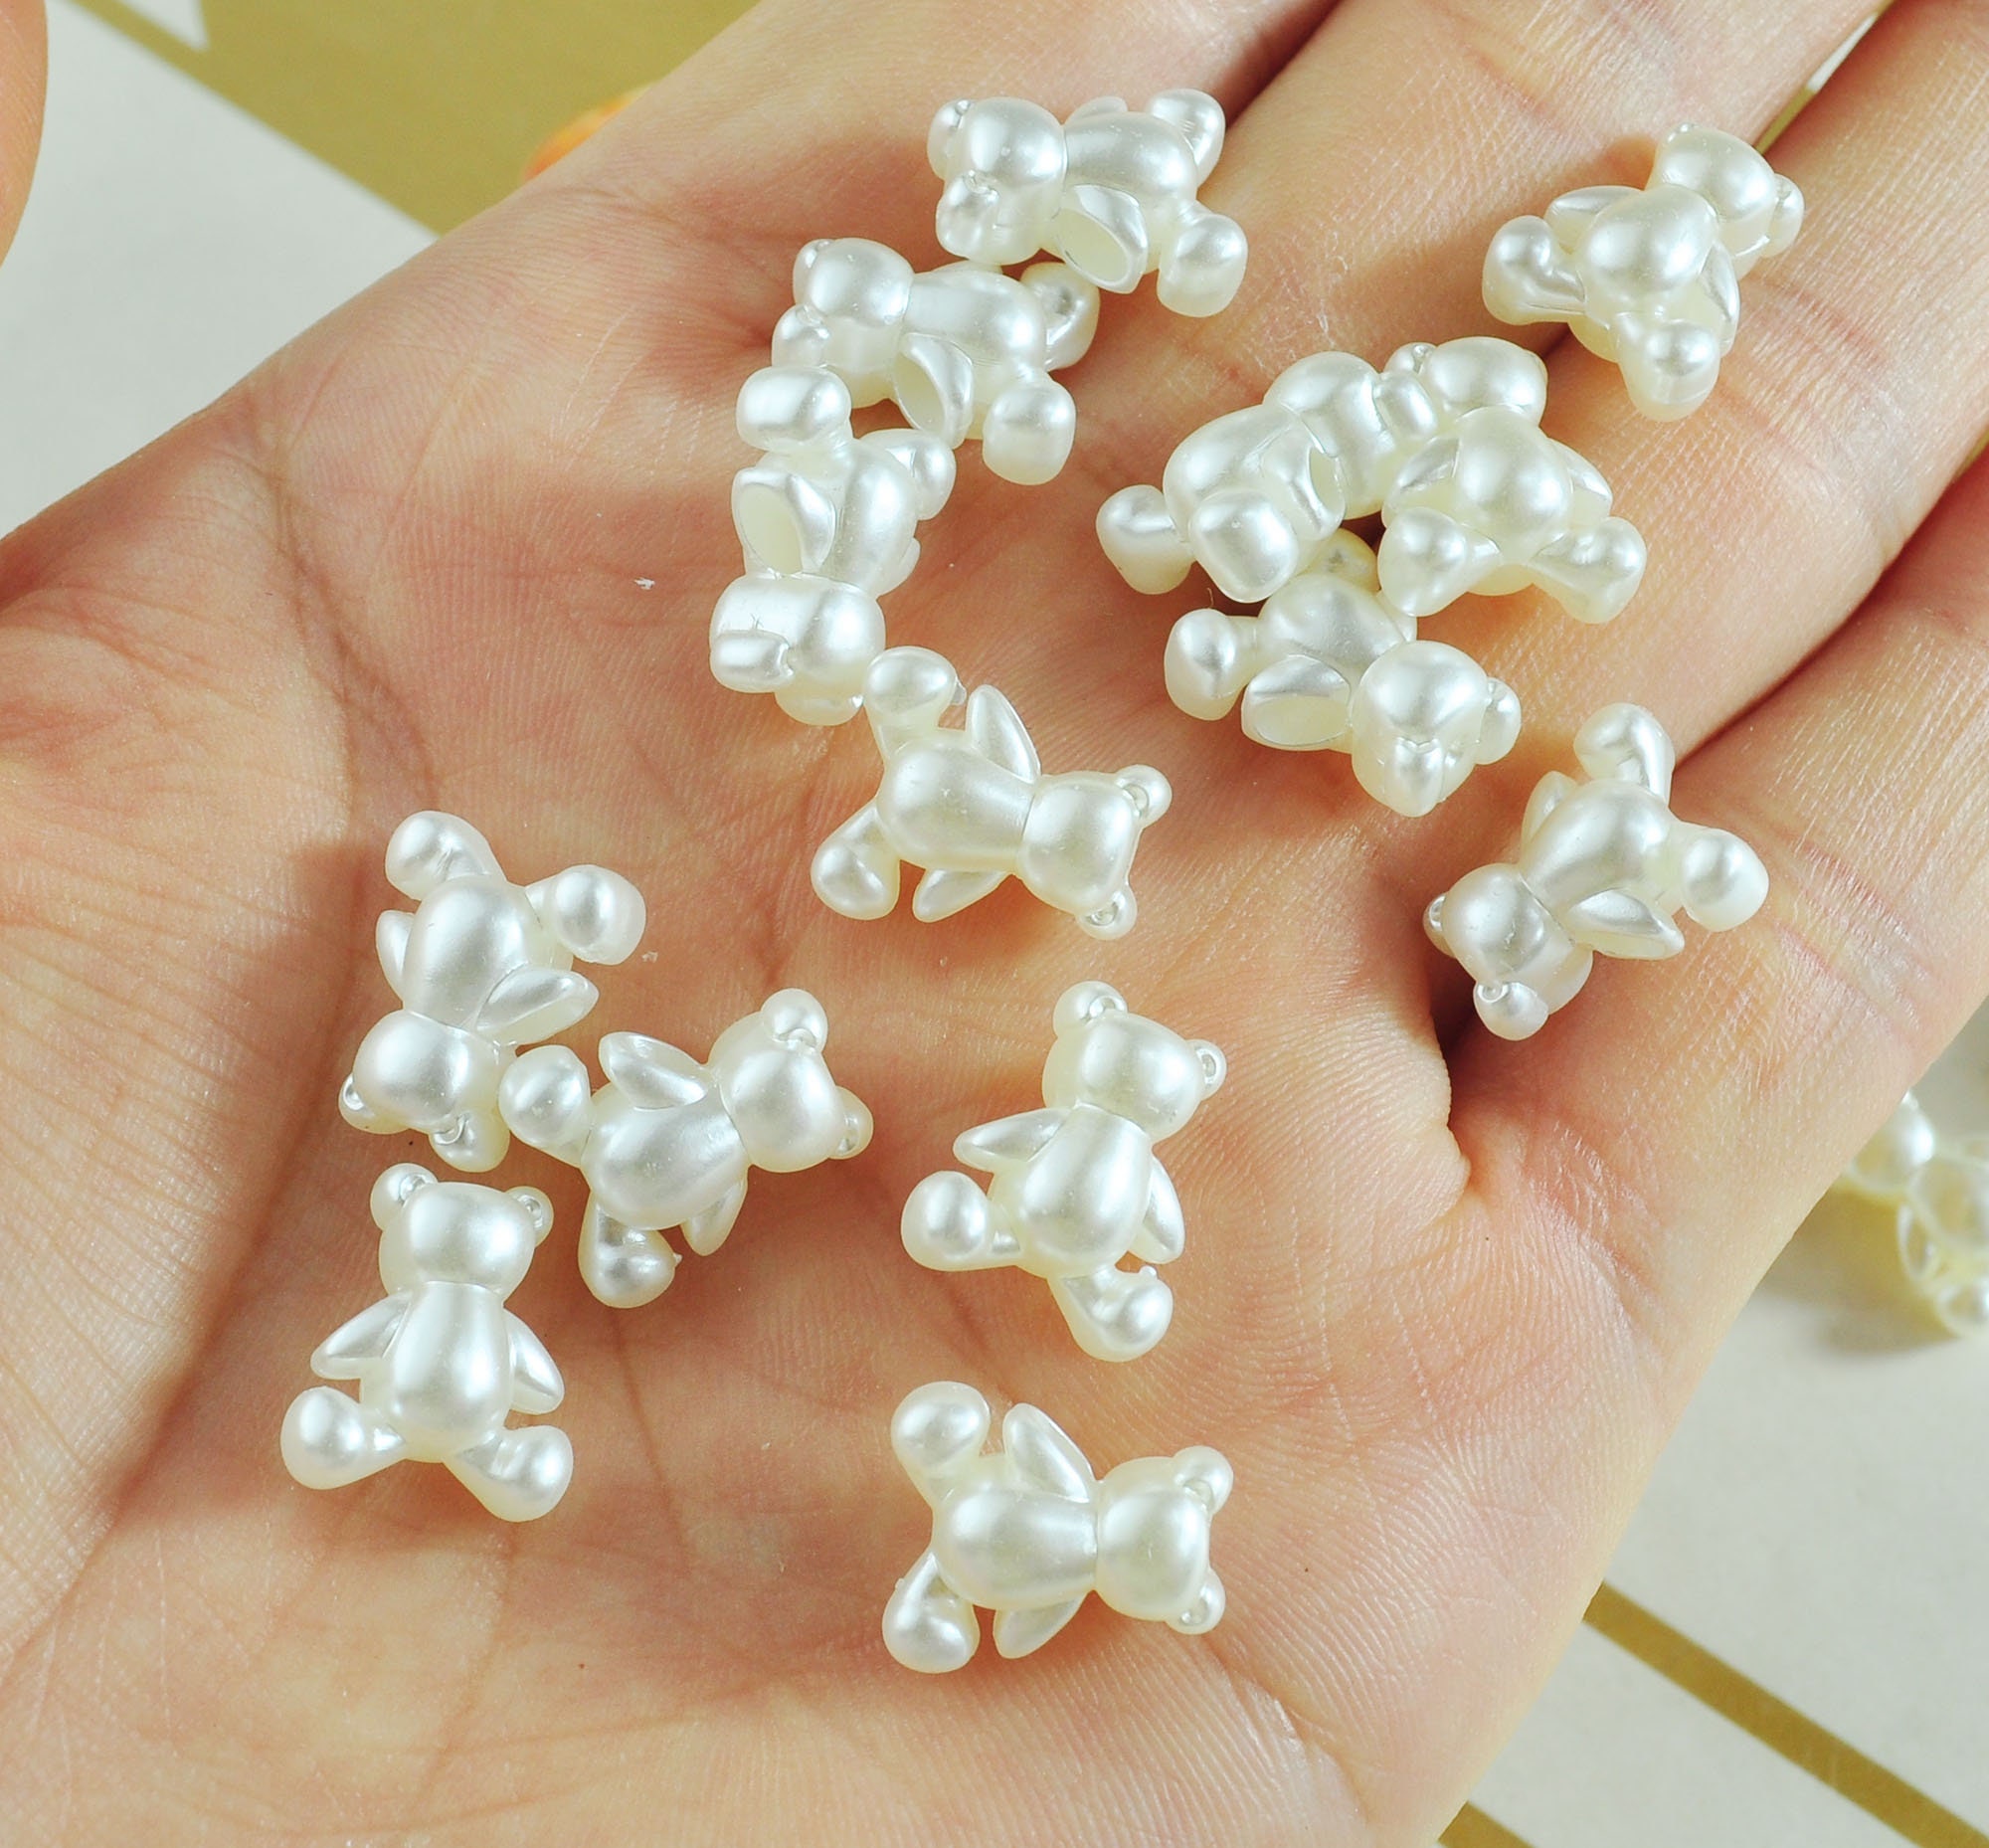 Imitation Pearl ABS Plastic Ivory Pearls 2-25mm All Sizes Half Round Loose  Bead for Nail Art DIY Craft Garment